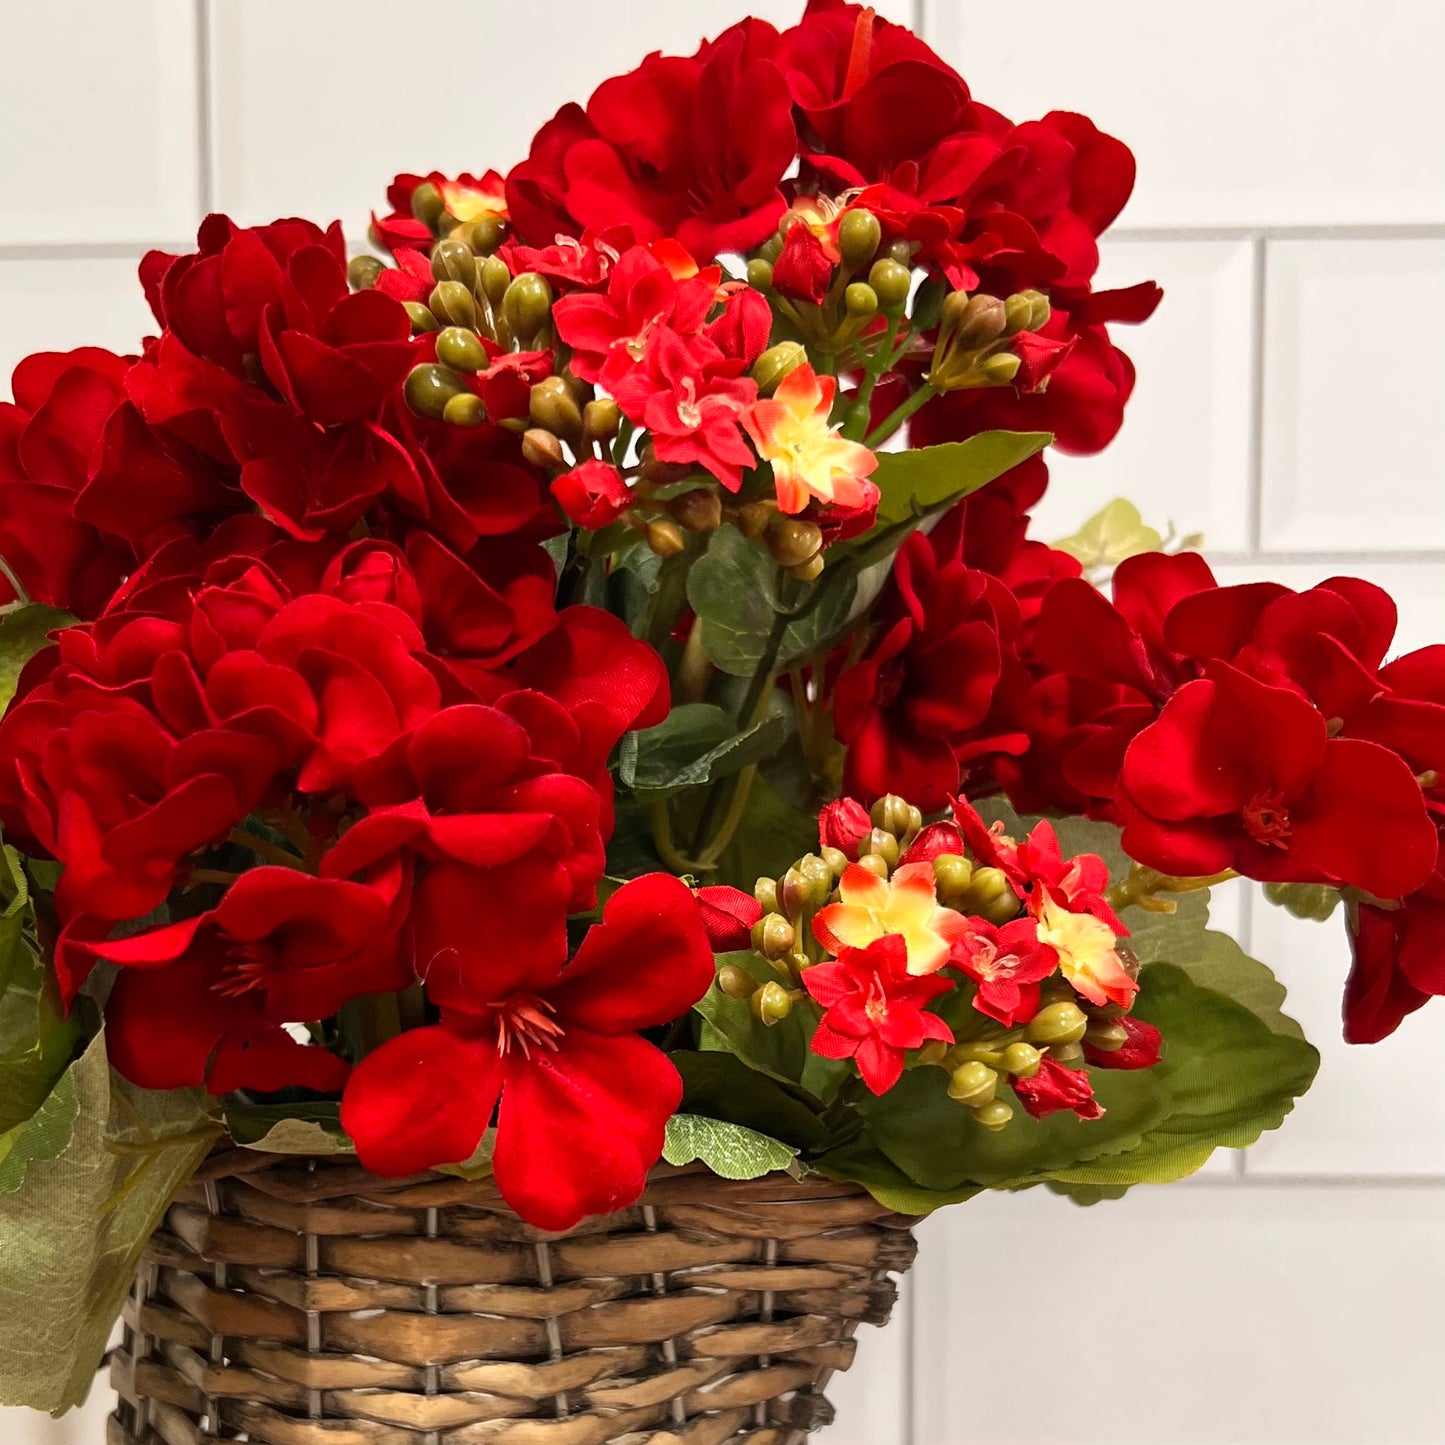 red geraniums in a woven vase with a subway tile background.